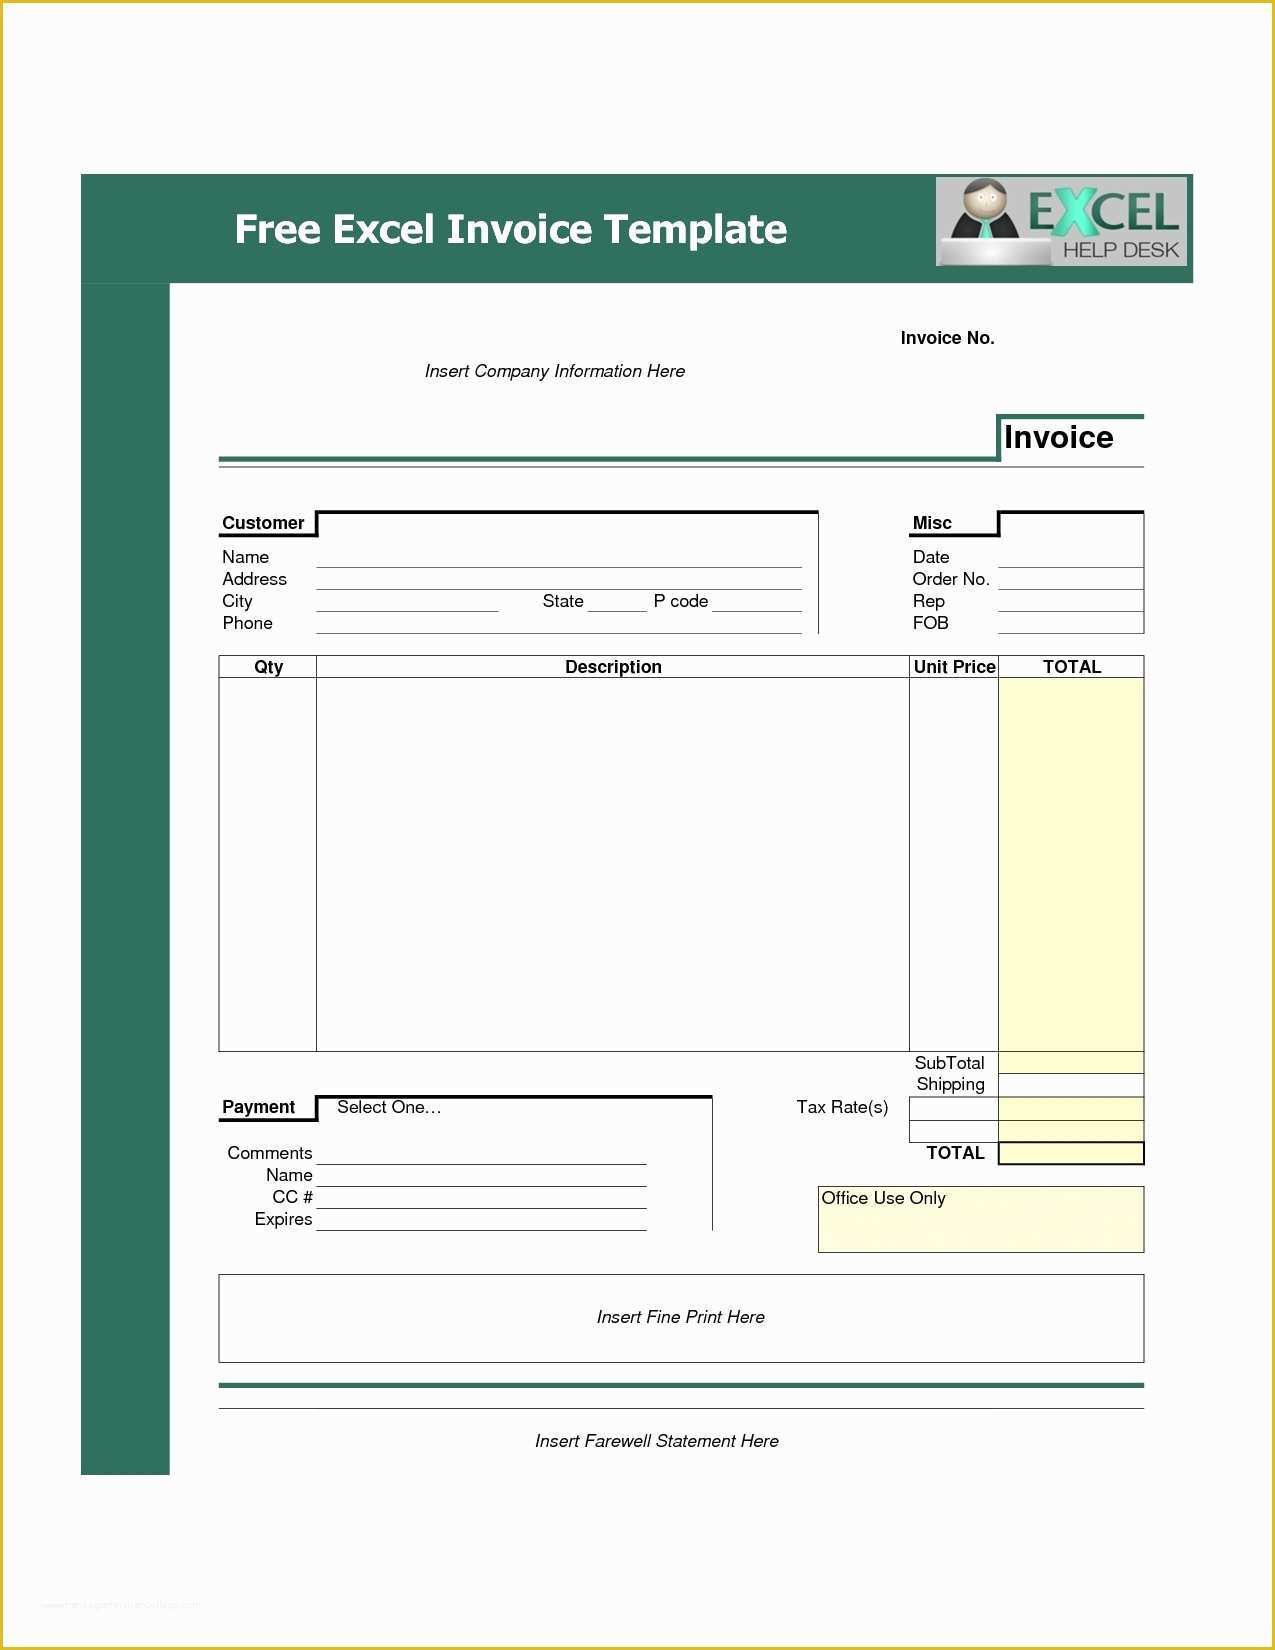 Easy Invoice Template Free Of Invoice Template Free Download Excel Invoice Template Ideas